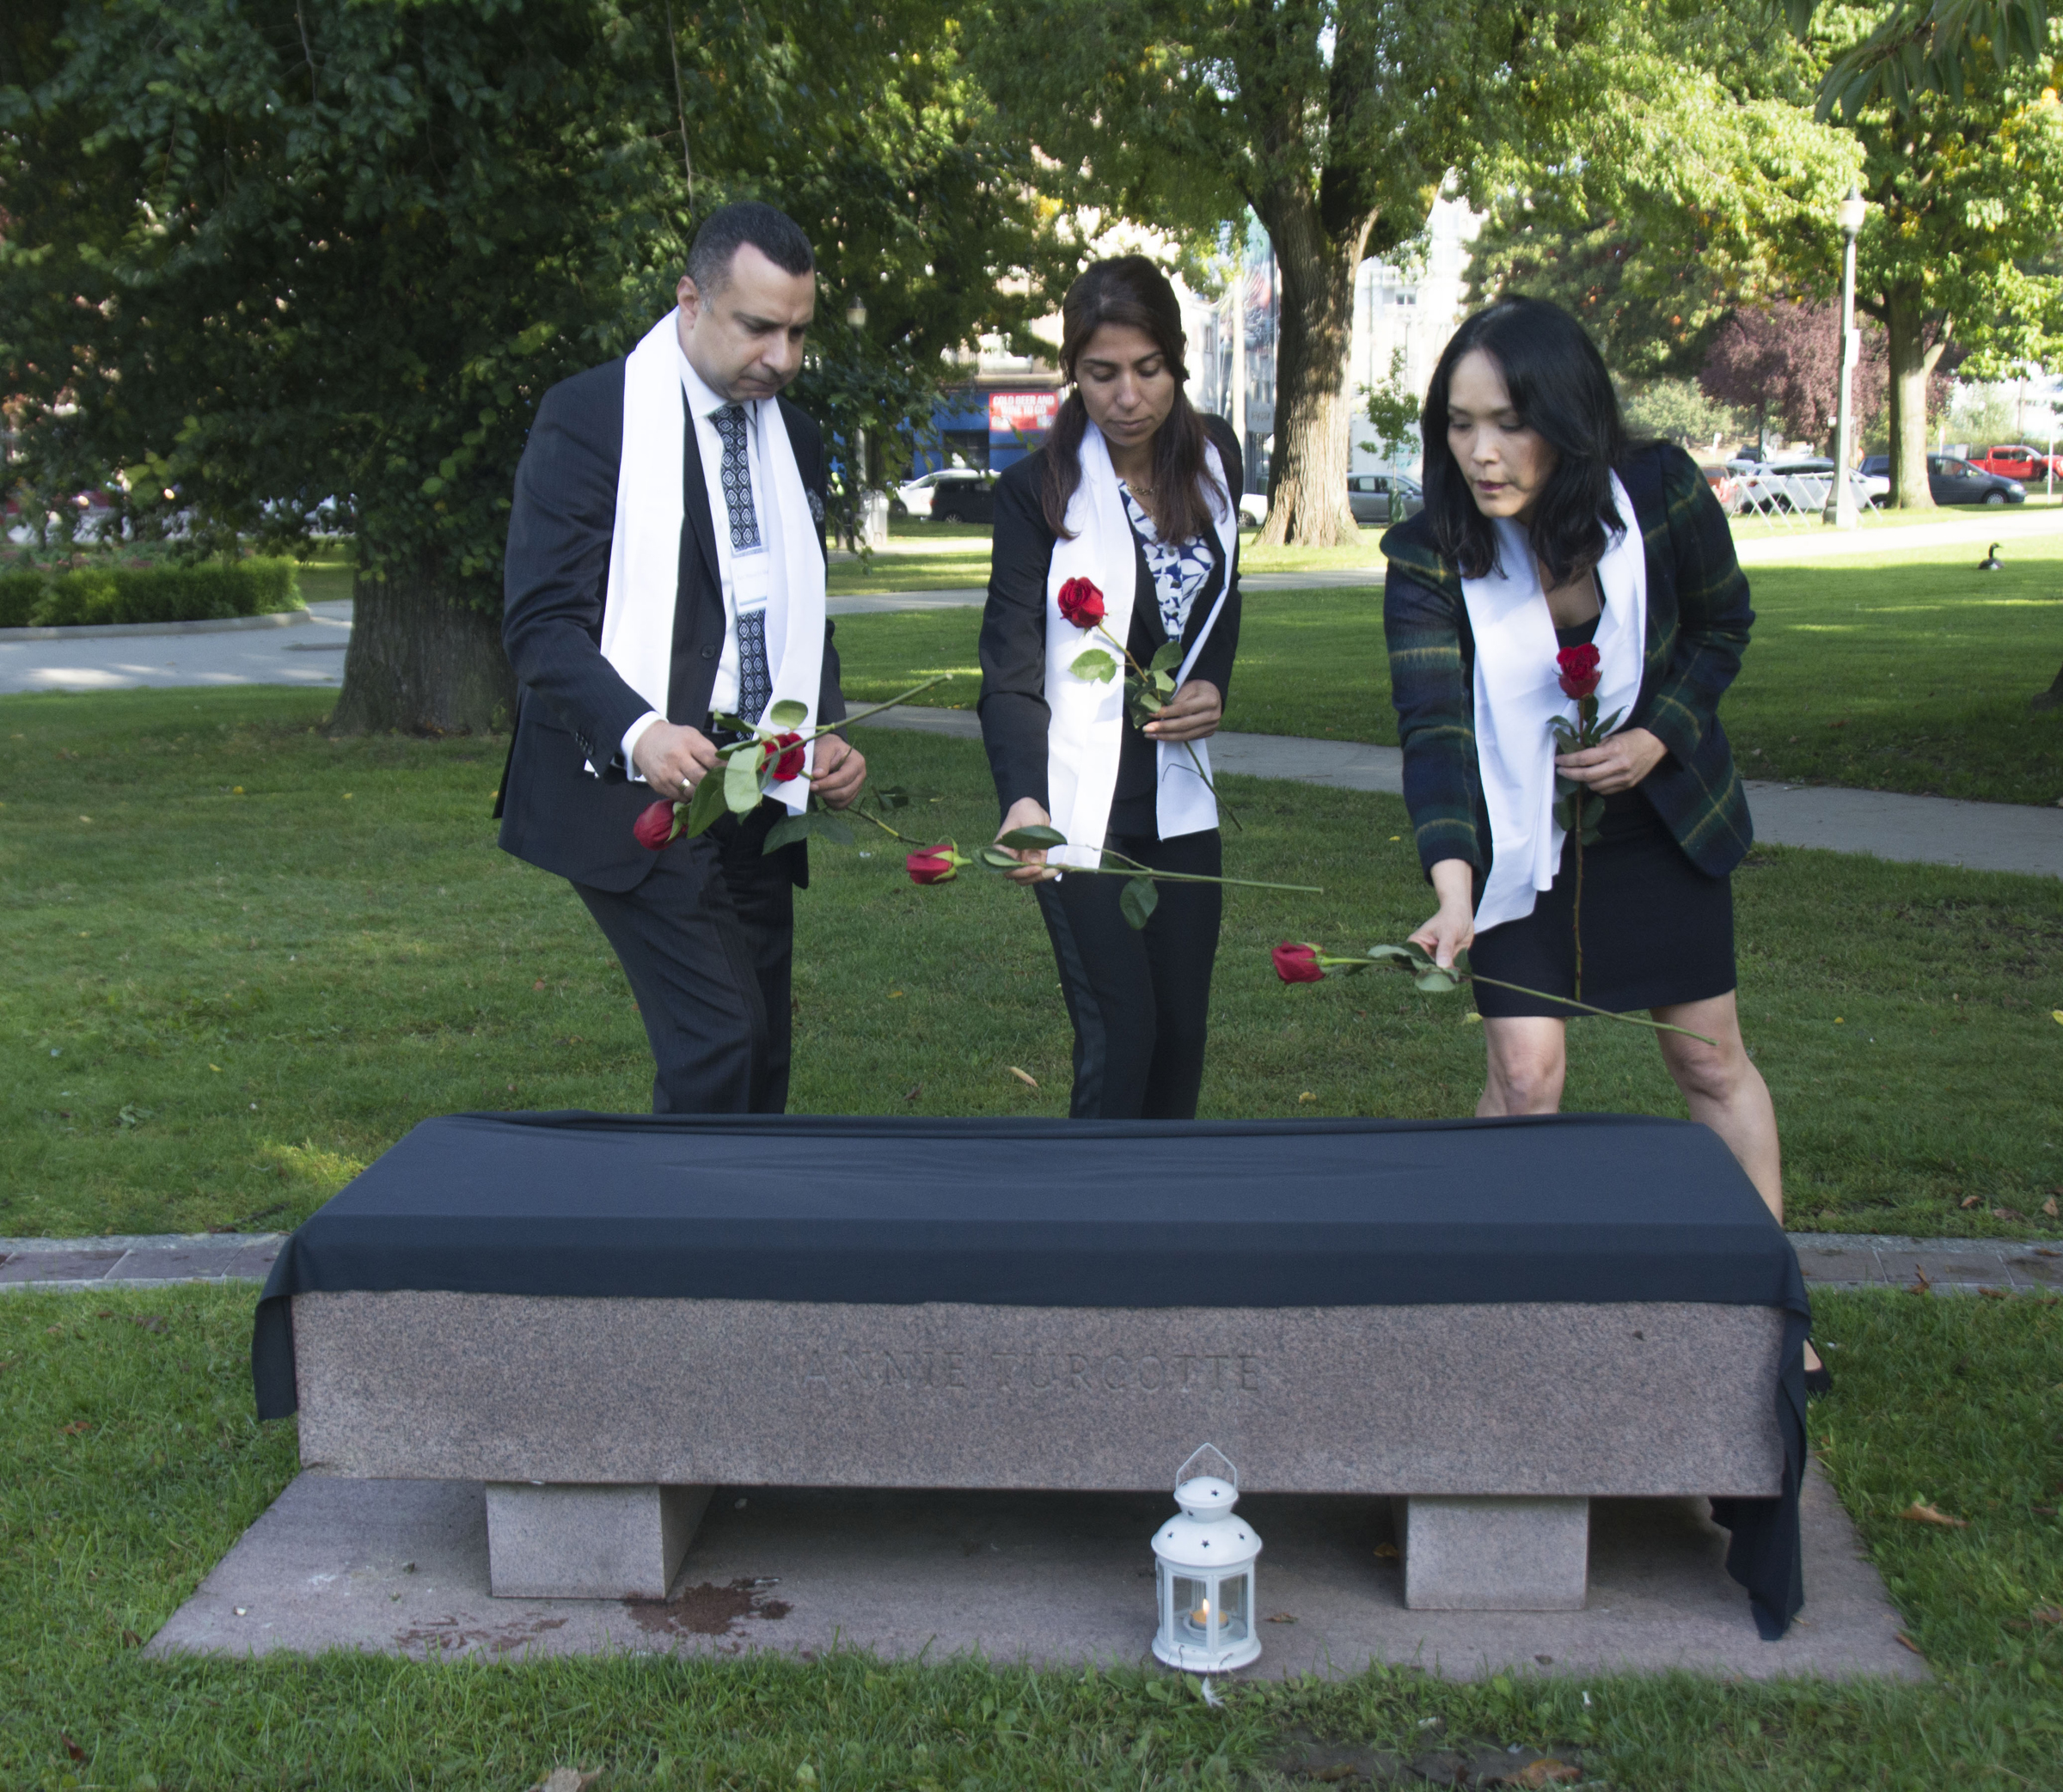 Placing roses on the veiled bench for Yazidi people who died in the genocide, starting August 3, 2014.Majed El Shafie of One Free World International with Adiba and MP Jenny Kwan (Vancouver East)